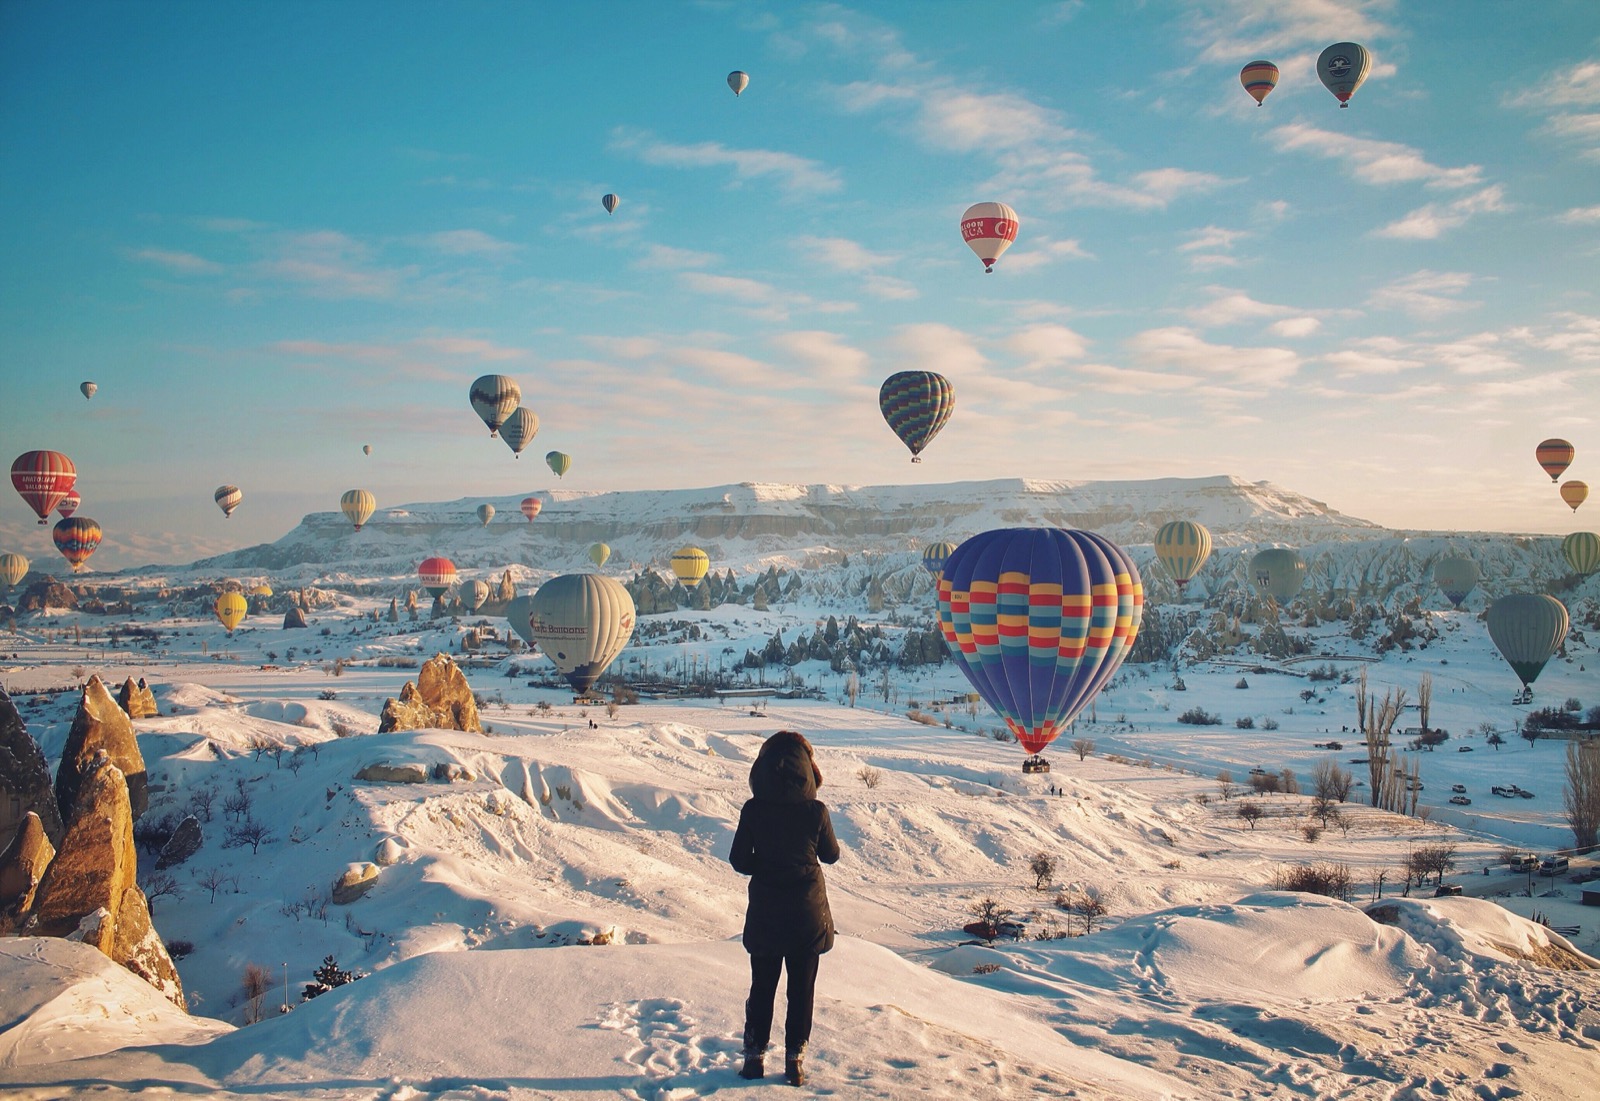 What US City Do I Belong In? Travel Hot Air Balloons